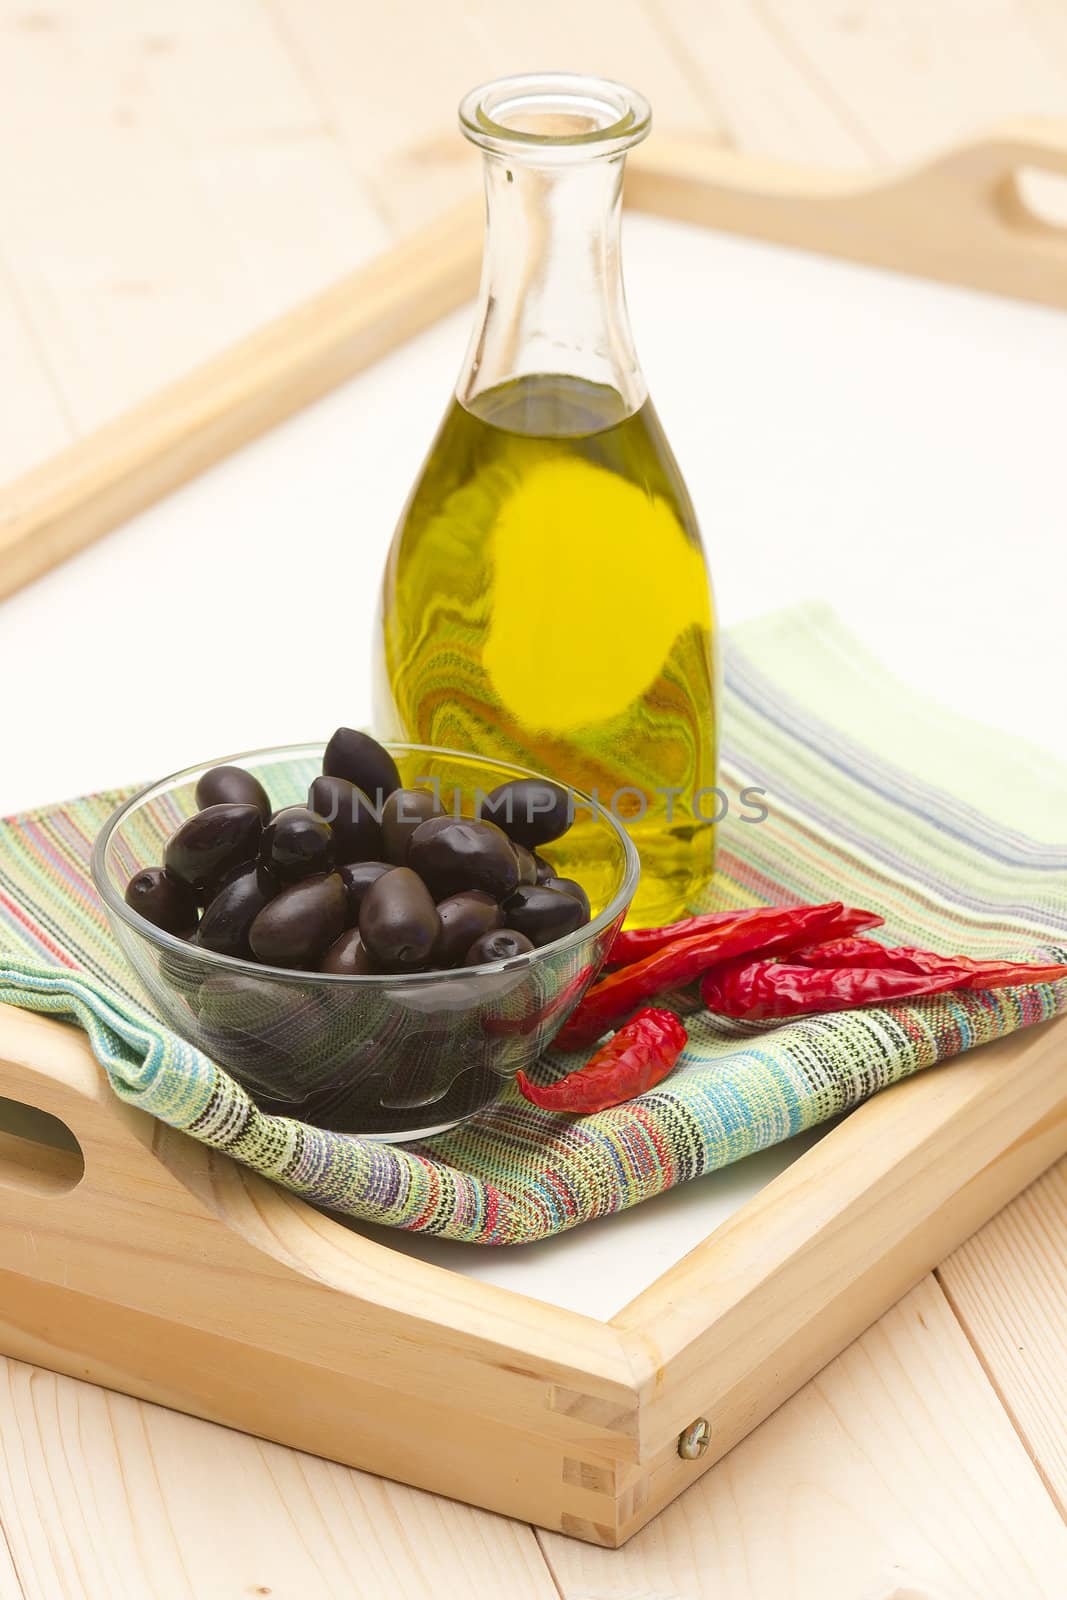 olive oil, black olives, chili peppers by miradrozdowski